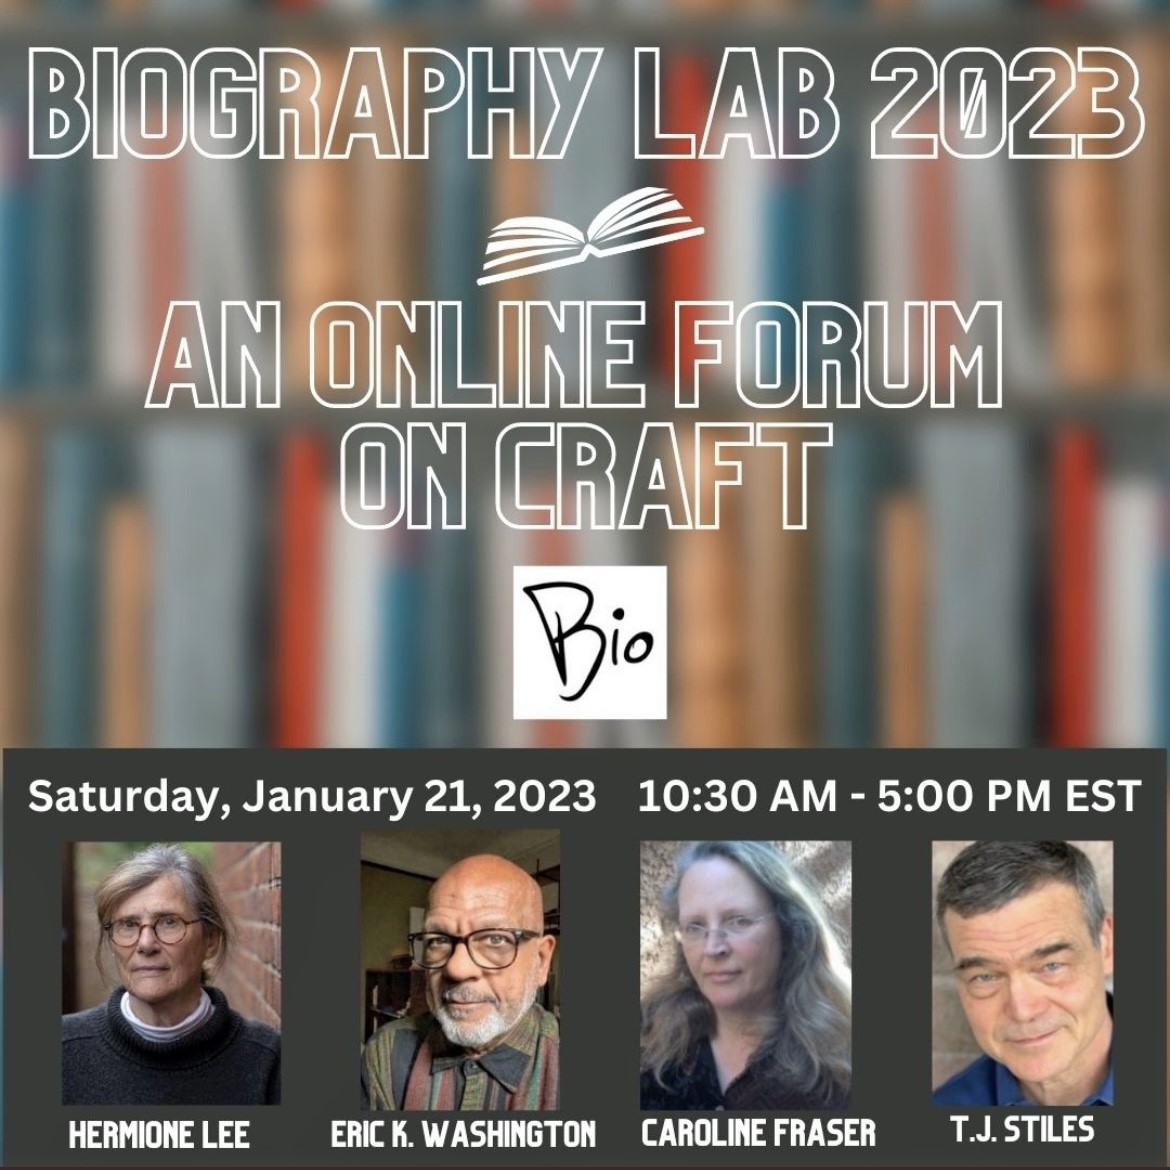 Biography Lab 2023, an online forum on craft, Saturday, January 21, 2023, 10:30 a.m. to 5:00 p.m. eastern time, with Hermione Lee, Eric K. Washington, Caroline Fraser, and T.J. Stiles